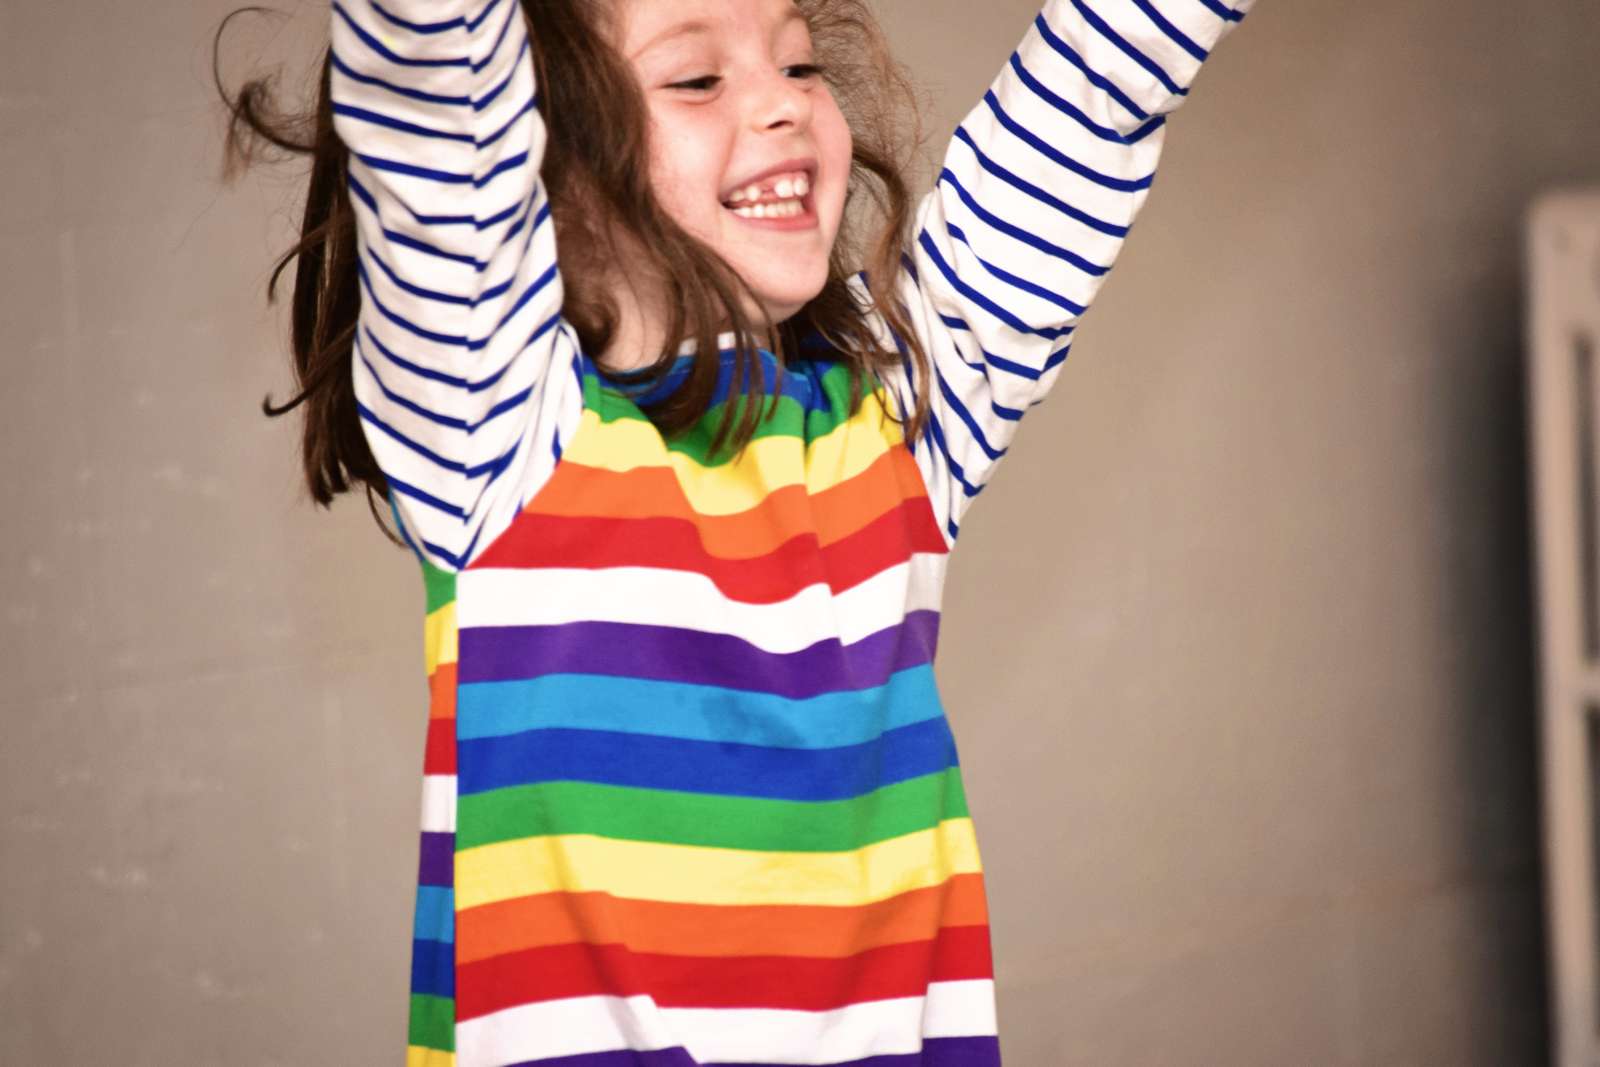 Girl in rainbow striped shirt smiling with arms up in the air